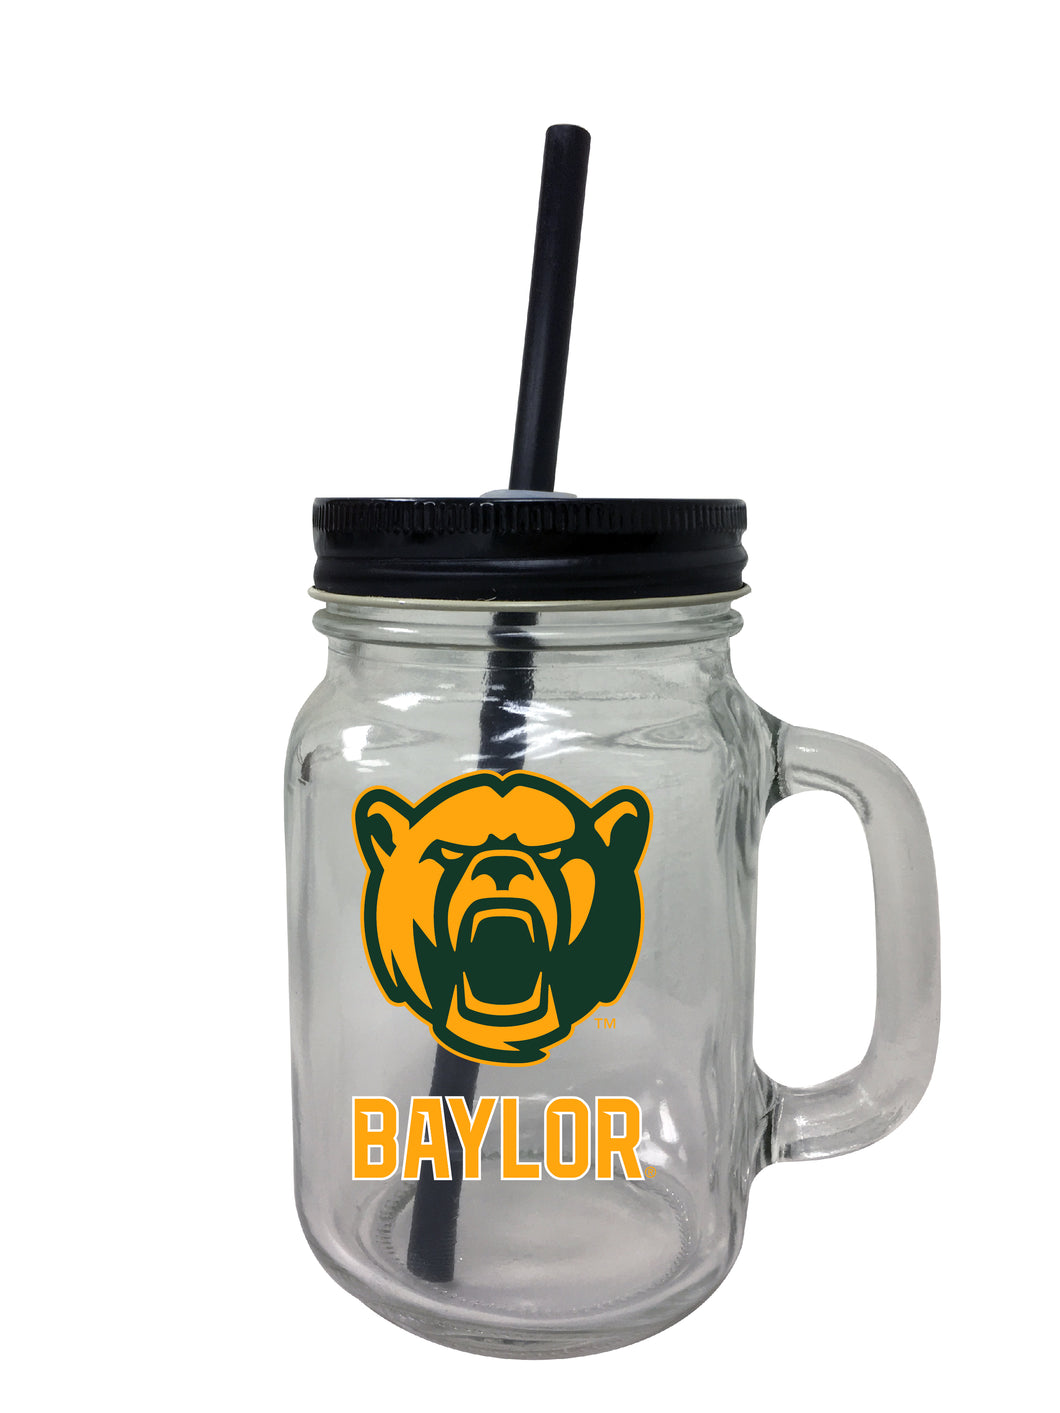 Baylor Bears NCAA Iconic Mason Jar Glass - Officially Licensed Collegiate Drinkware with Lid and Straw 2-Pack